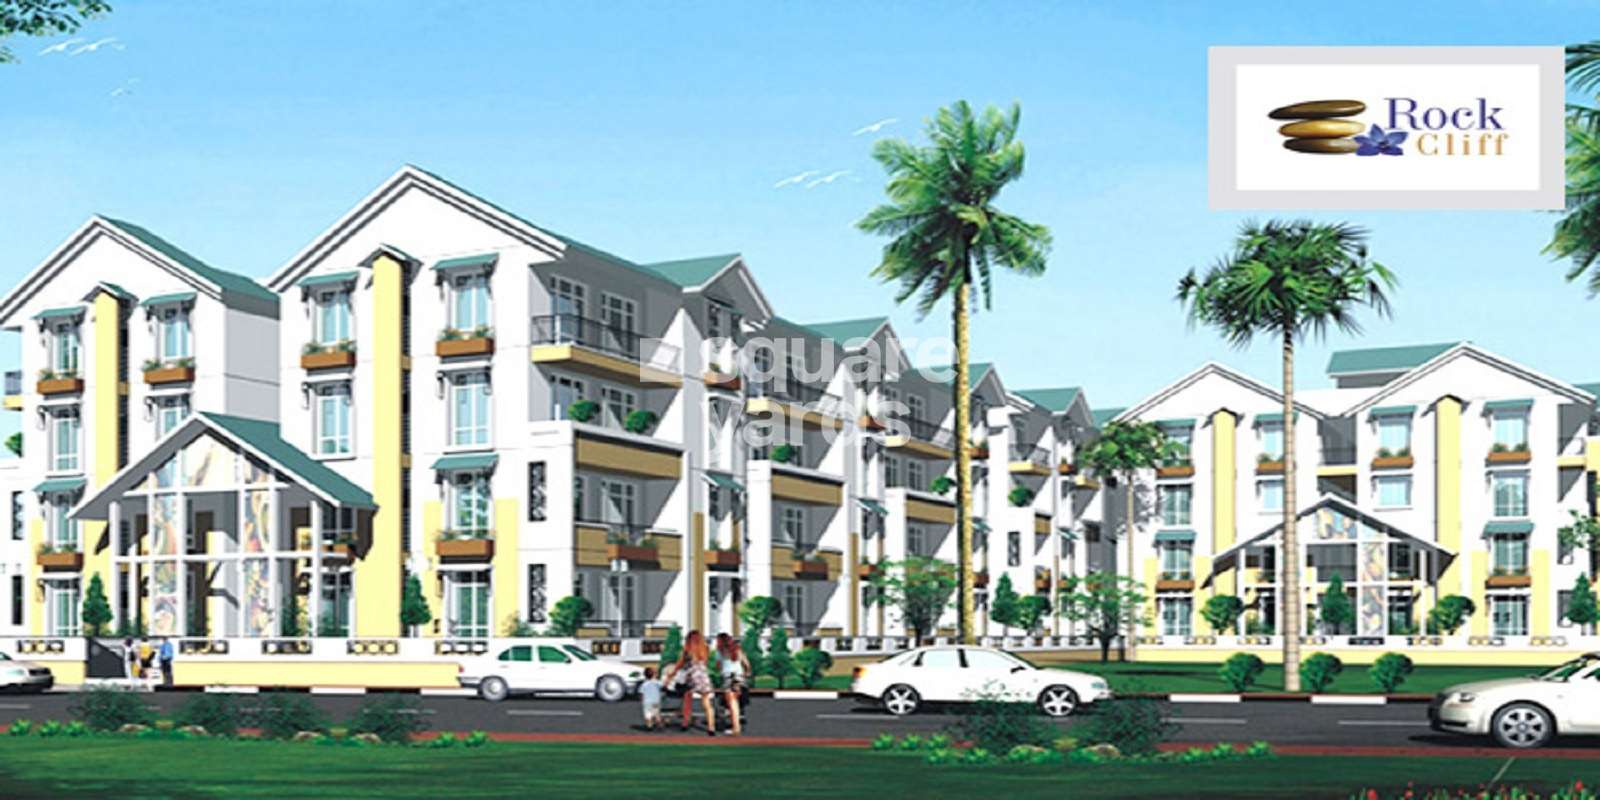 Thirtha Rock cliff Apartment Cover Image